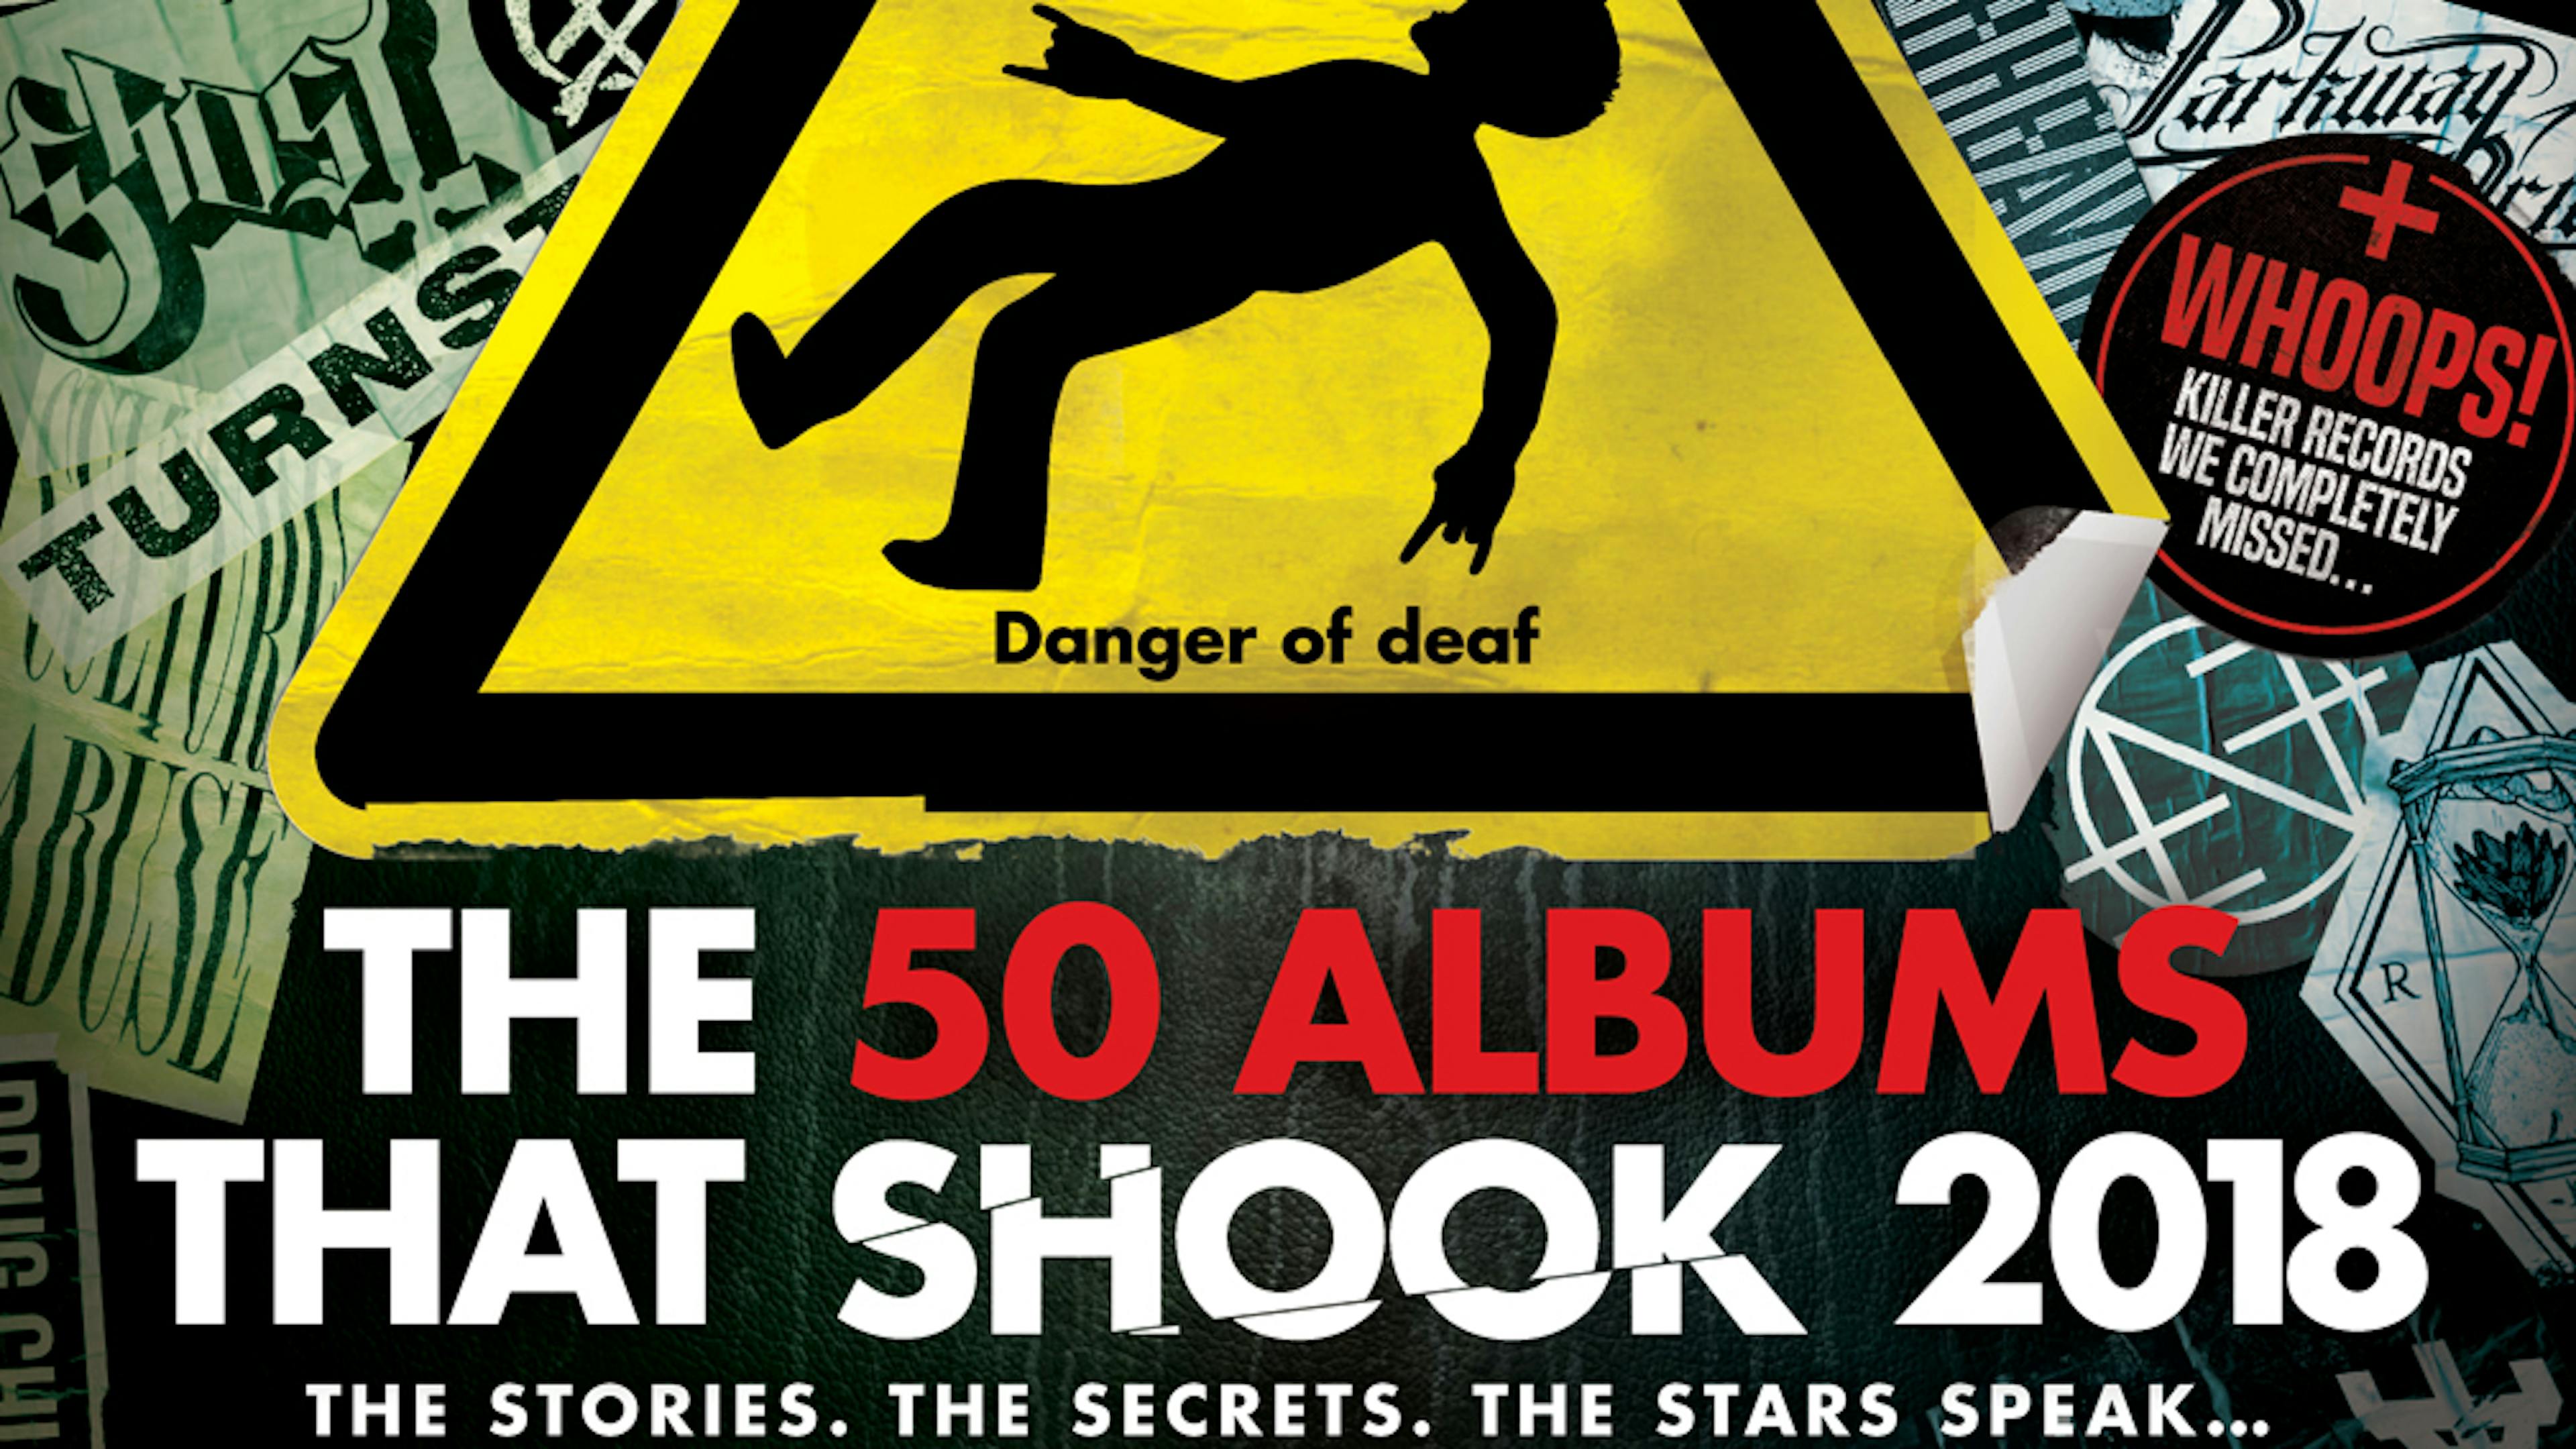 K!1752 – The 50 Albums That Shook 2018